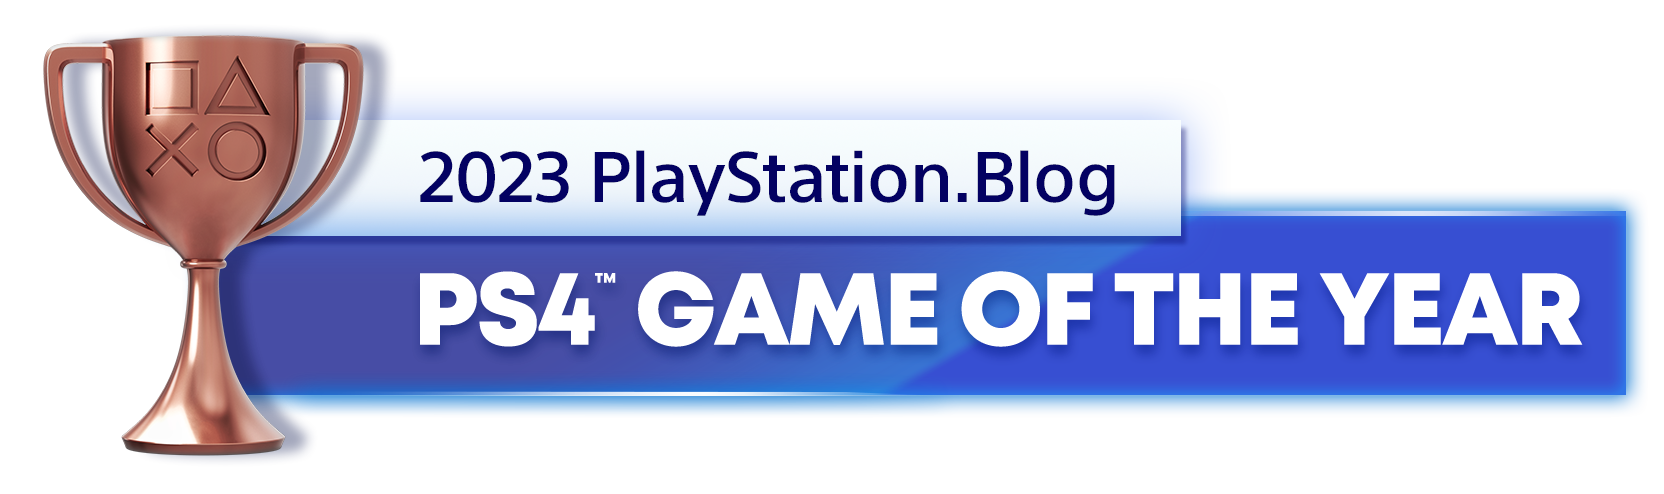  "Bronze Trophy for the 2023 PlayStation Blog PS4 Game of the Year Winner"